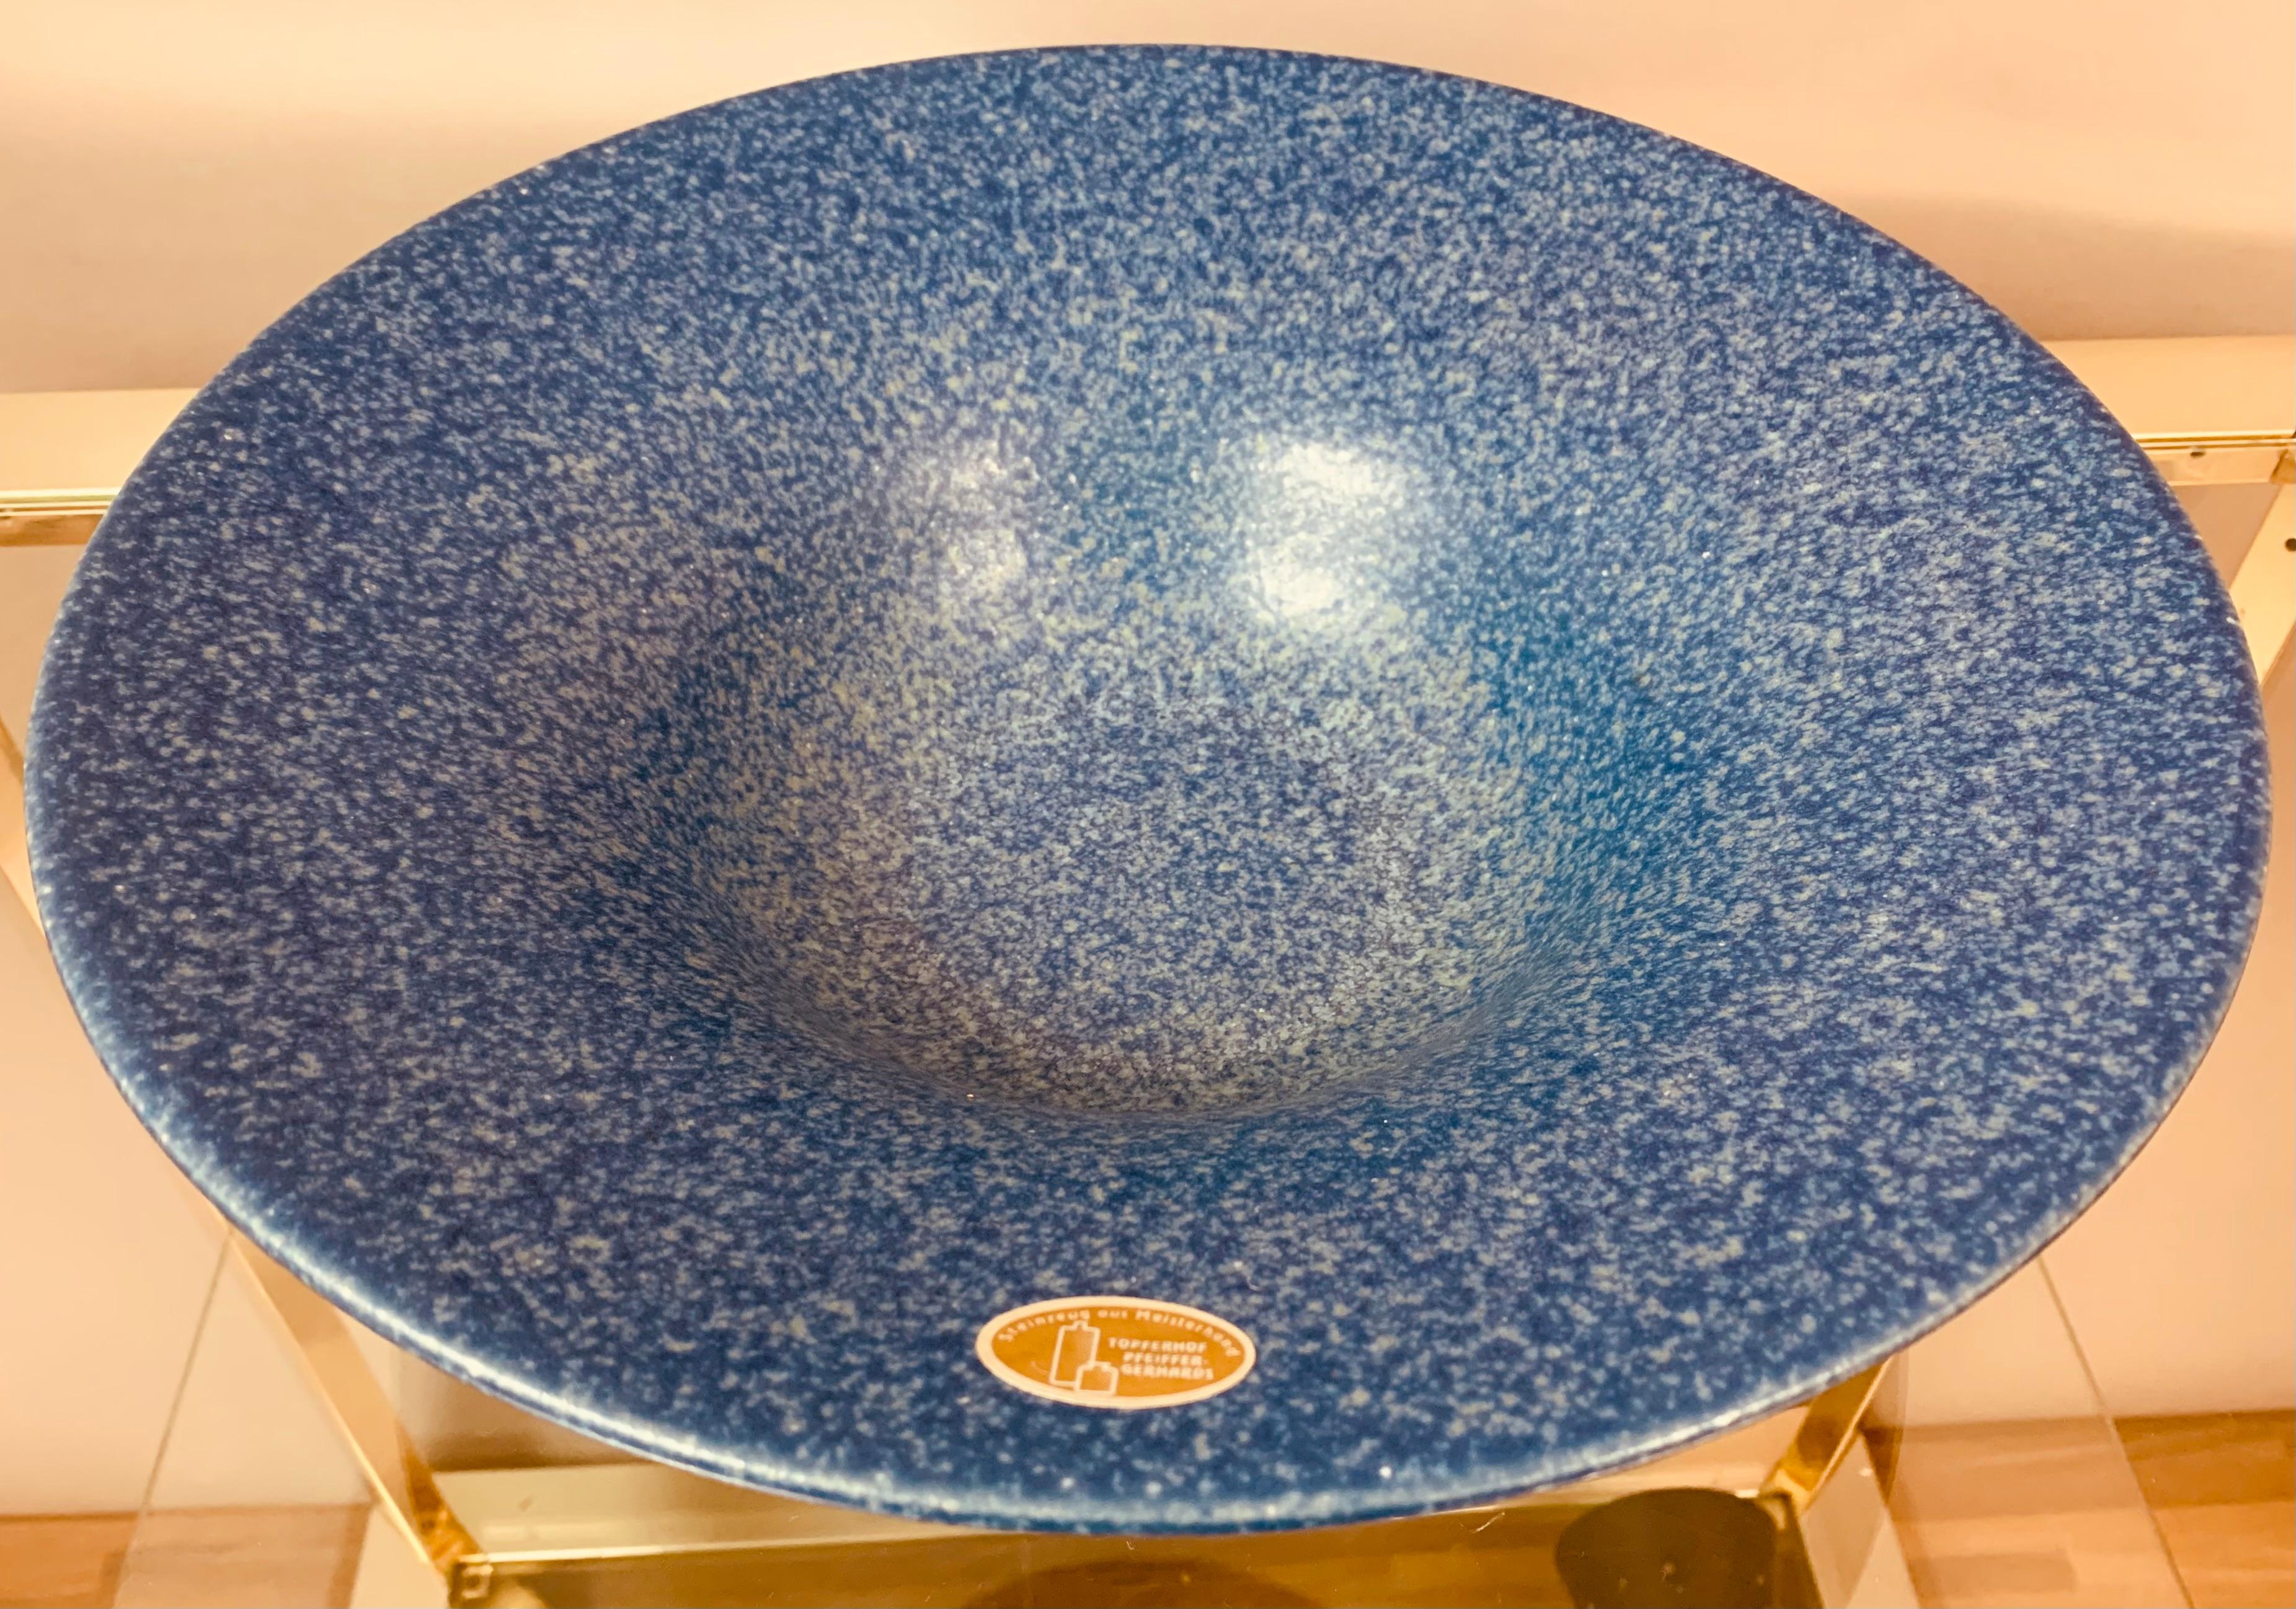 1970s German Studio pottery bowl in the most vivid mottled colour of dark and light blue. The bowl has a beautiful subtle matte glaze. A lovely feature centrepiece plate for a coffee or dining table perhaps to hold fruit if you wish. In very good